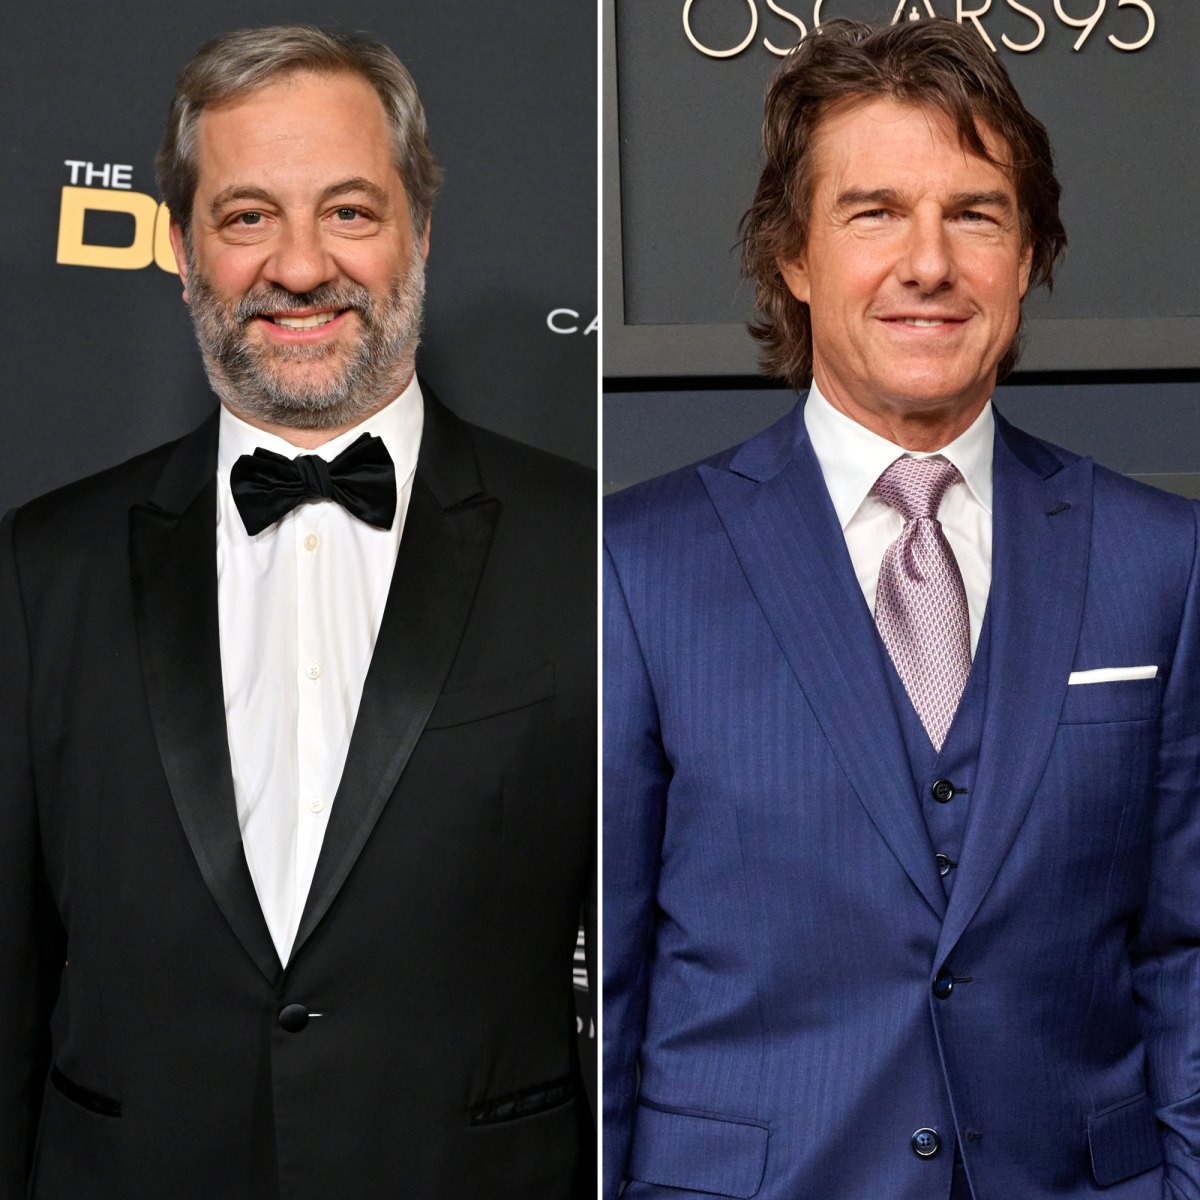 Judd Apatow jokes Tom Cruise stunt 'feels like a Scientology ad' in DGA Awards monologue